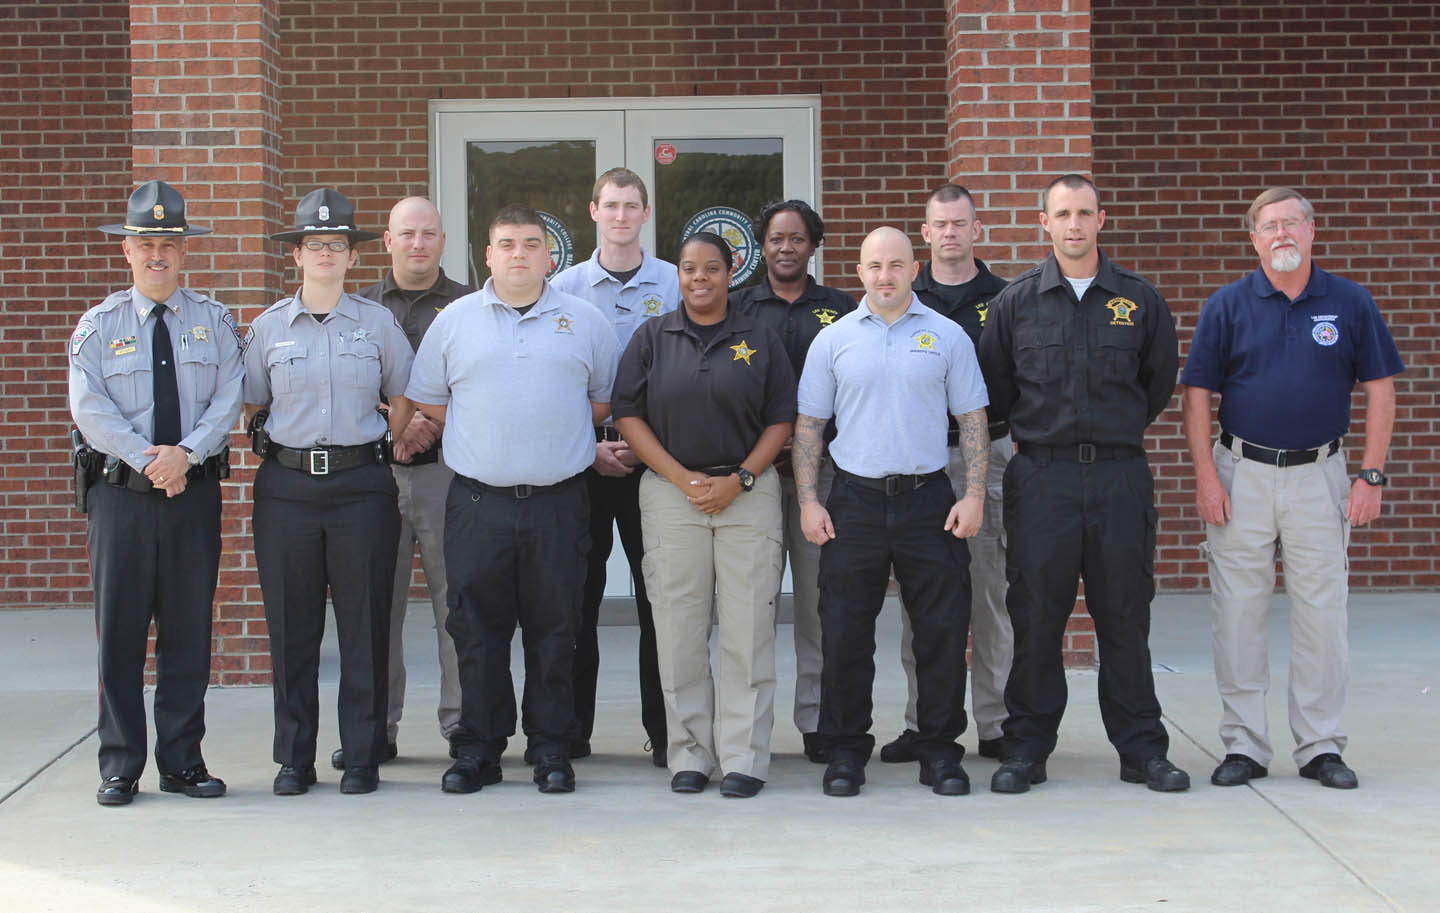 Click to enlarge,  Nine officers from the sheriff offices in Chatham, Harnett and Lee counties graduated Oct. 29 from the Detention Officer School at Central Carolina Community College's Emergency Services Training Center, in Sanford. The officers completed 168 hours of classroom and practical instruction and achieved a 90.6 grade average on the state certification examination. They are now prepared to serve as detention officers with municipal, county or regional jails in North Carolina. The course focused on four key areas: legal, physical fitness, practical applications and medical. Pictured are (first row, from left) Detention Officer School Director Capt. Doug Stuart and Detention Officer Autumn Keifer, both of the Chatham County Sheriff's Office; Detention Officer Anthony Crouch, Harnett County Sheriff's Office; Detention Officer Toshiba Battle, Lee County Sheriff's Office; Detention Officers Peter Cipriano and Robert Norris, both of the Harnett County Sheriff's Office; and School Director Larry Foster, CCCC coordinator for Law Enforcement Training; and (back row, from left) Detention Officer Michael Fay, Lee County Sheriff's Office; Detention Officer Johnathan Edwards, Harnett County Sheriff's Office; and Detention Officers Annette Blue and Les Goodwin, both of the Lee County Sheriff's Office. For more information about the Detention Officer School, contact Larry Foster at 919-777-7772 or lfoster@cccc.edu.  